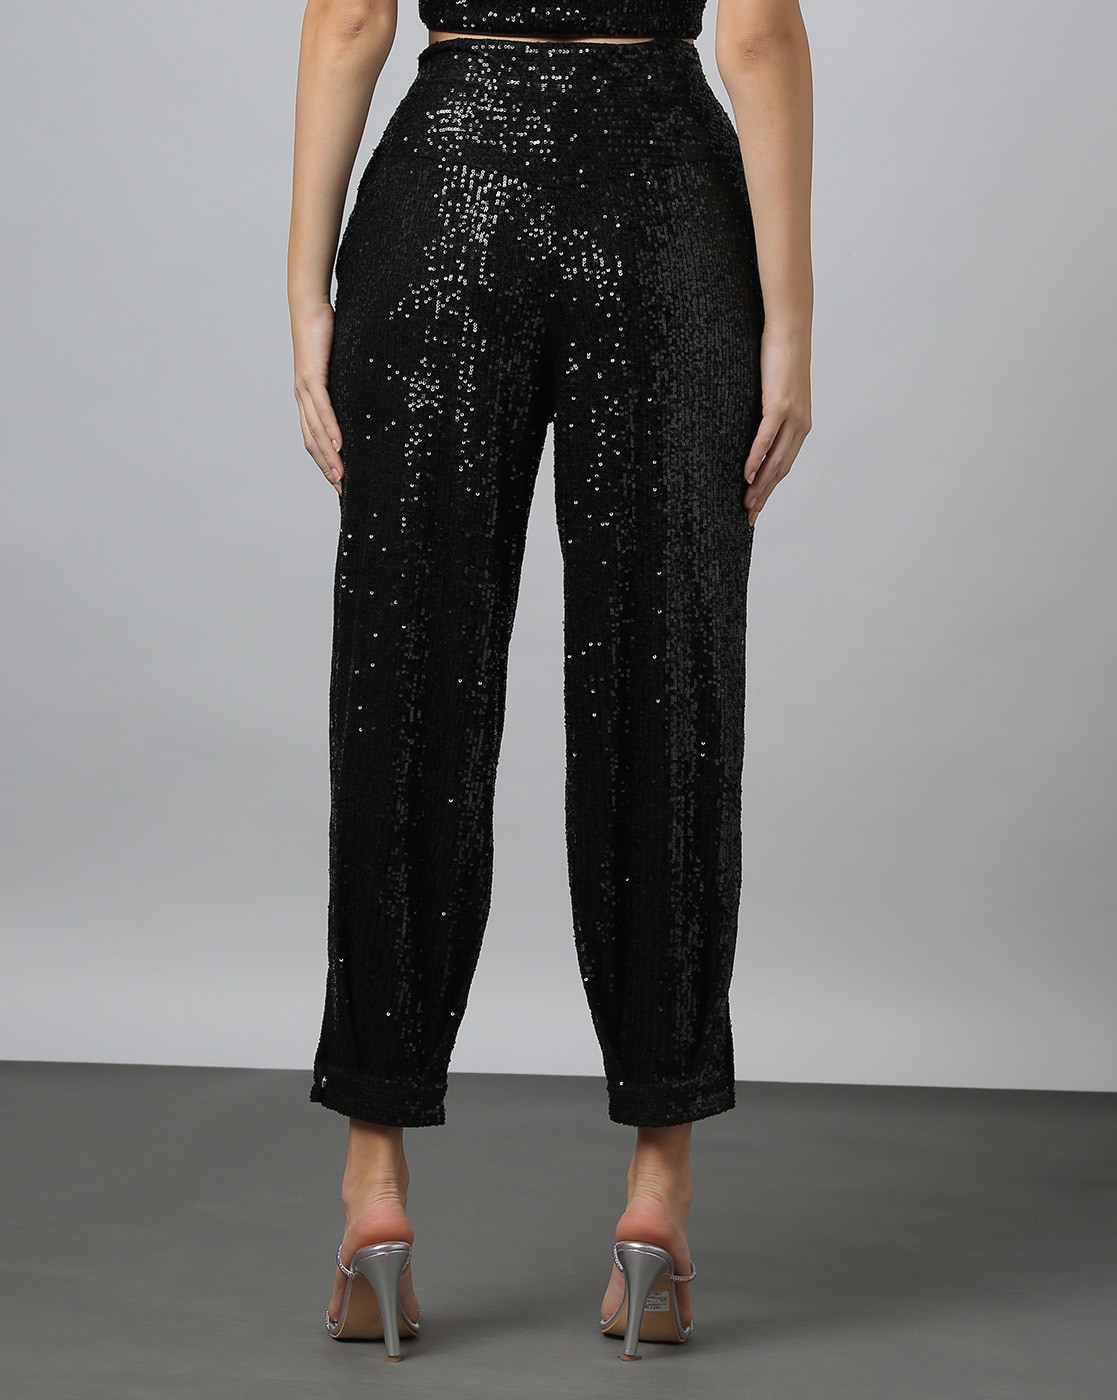 Sequined trousers - Natural white/Silver-coloured - Ladies | H&M IN